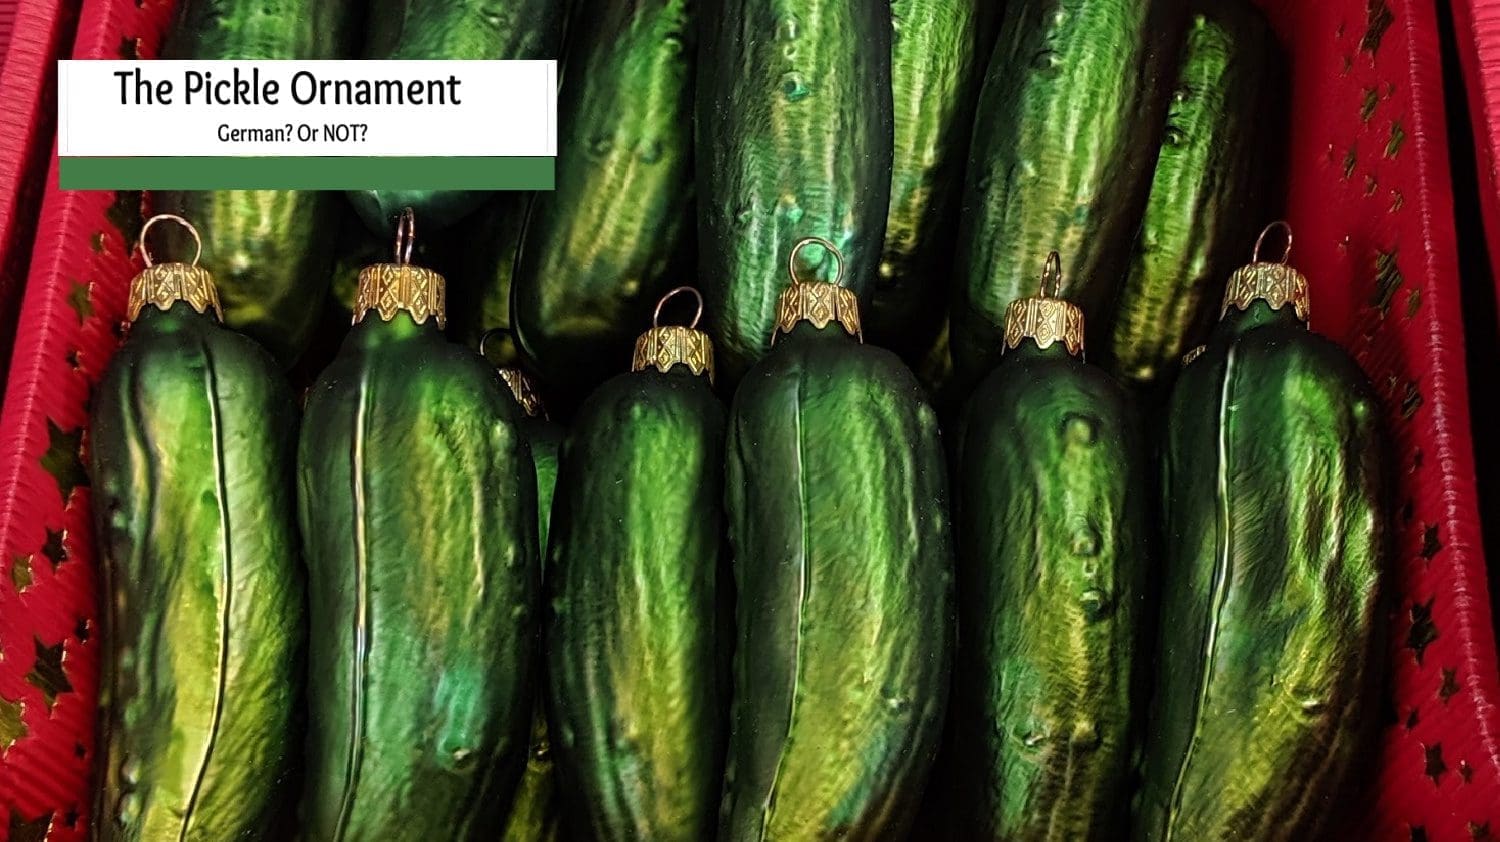 German Pickle Ornament Story- How did the Green Pickle Ornament Tradition Start?